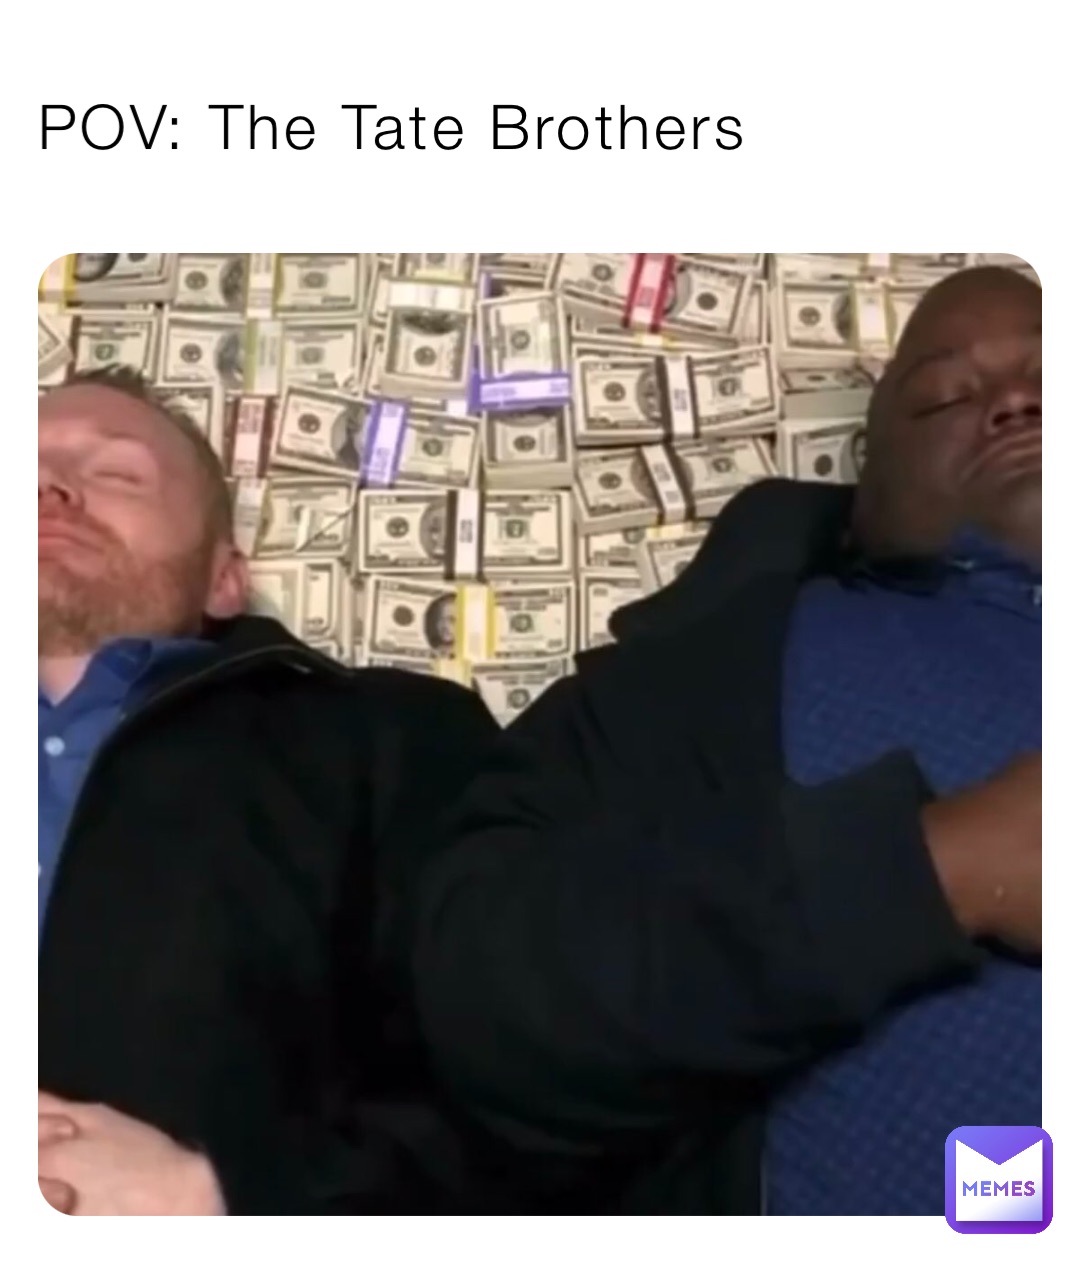 POV: The Tate Brothers